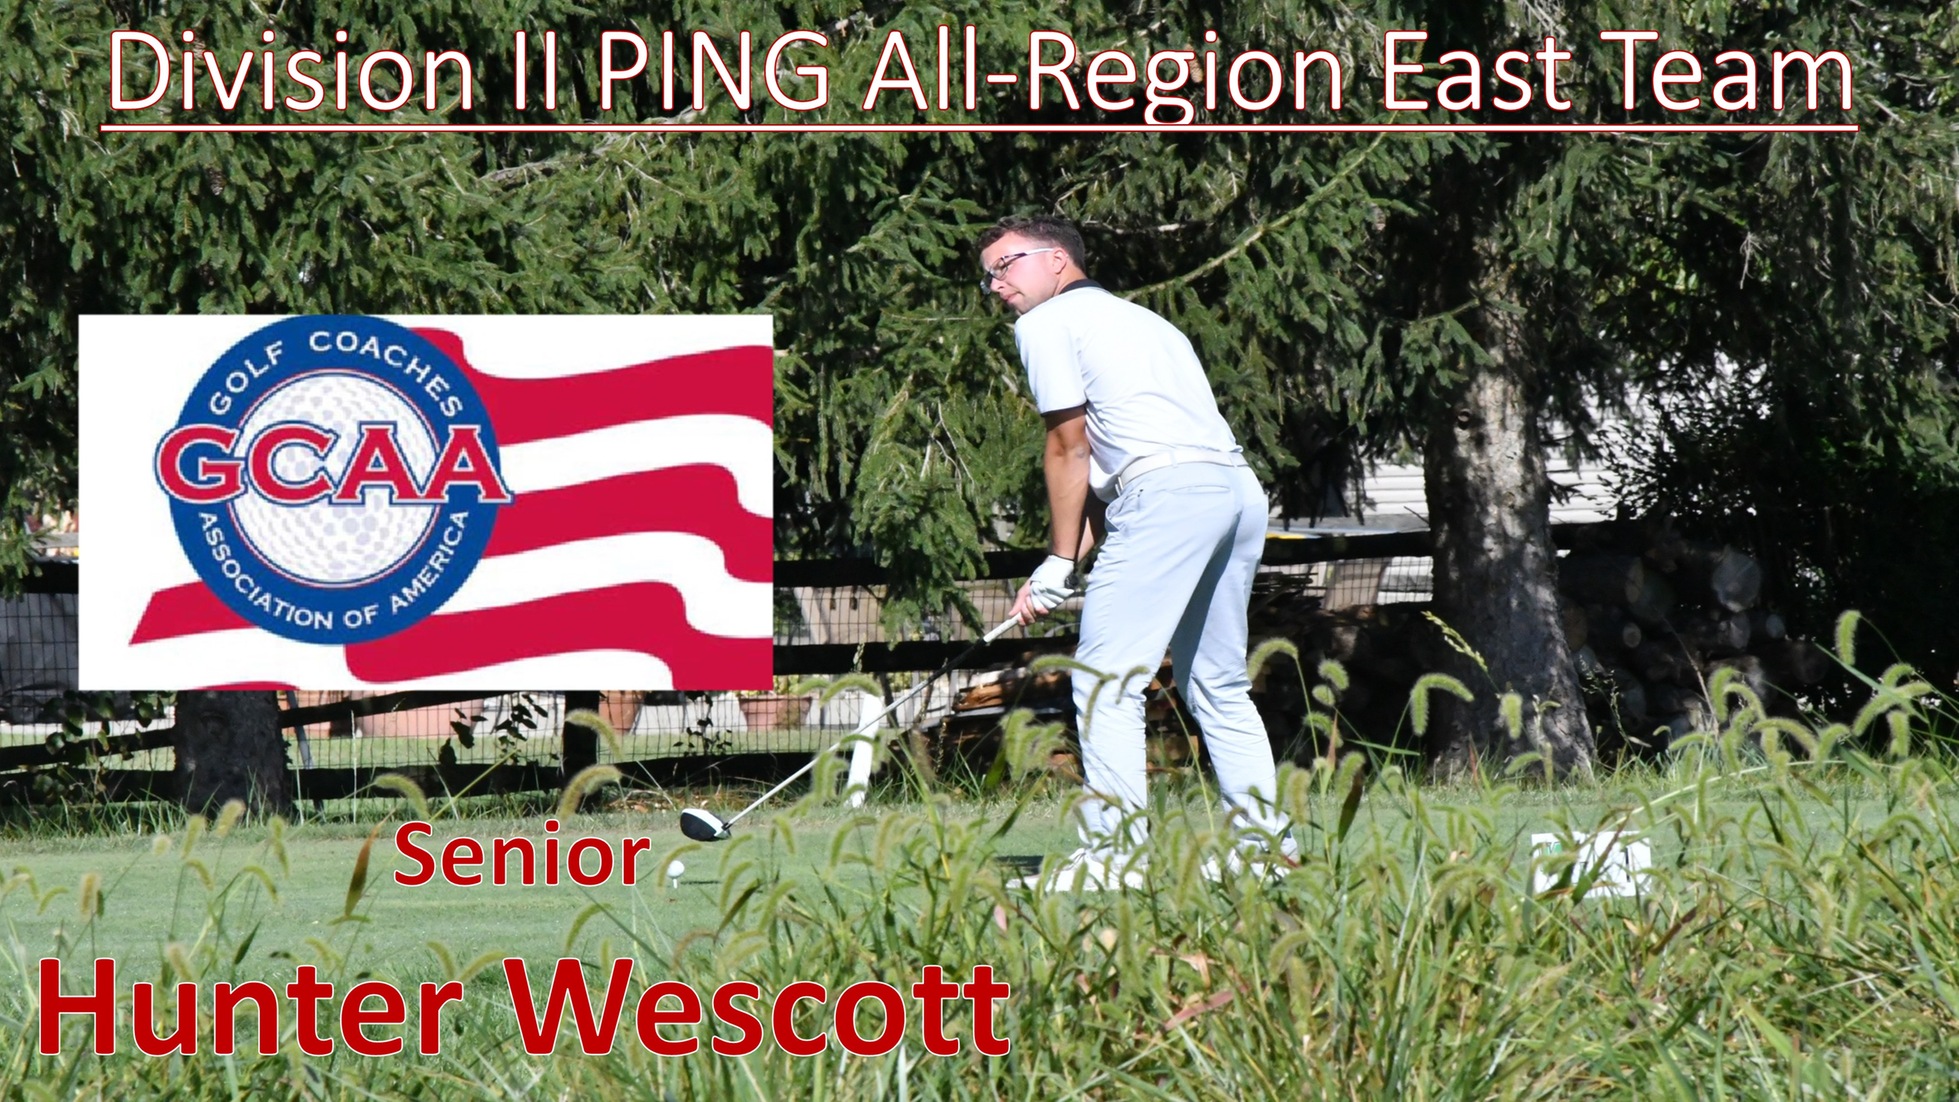 WESCOTT NAMED TO DIVISION II PING ALL-REGION EAST TEAM